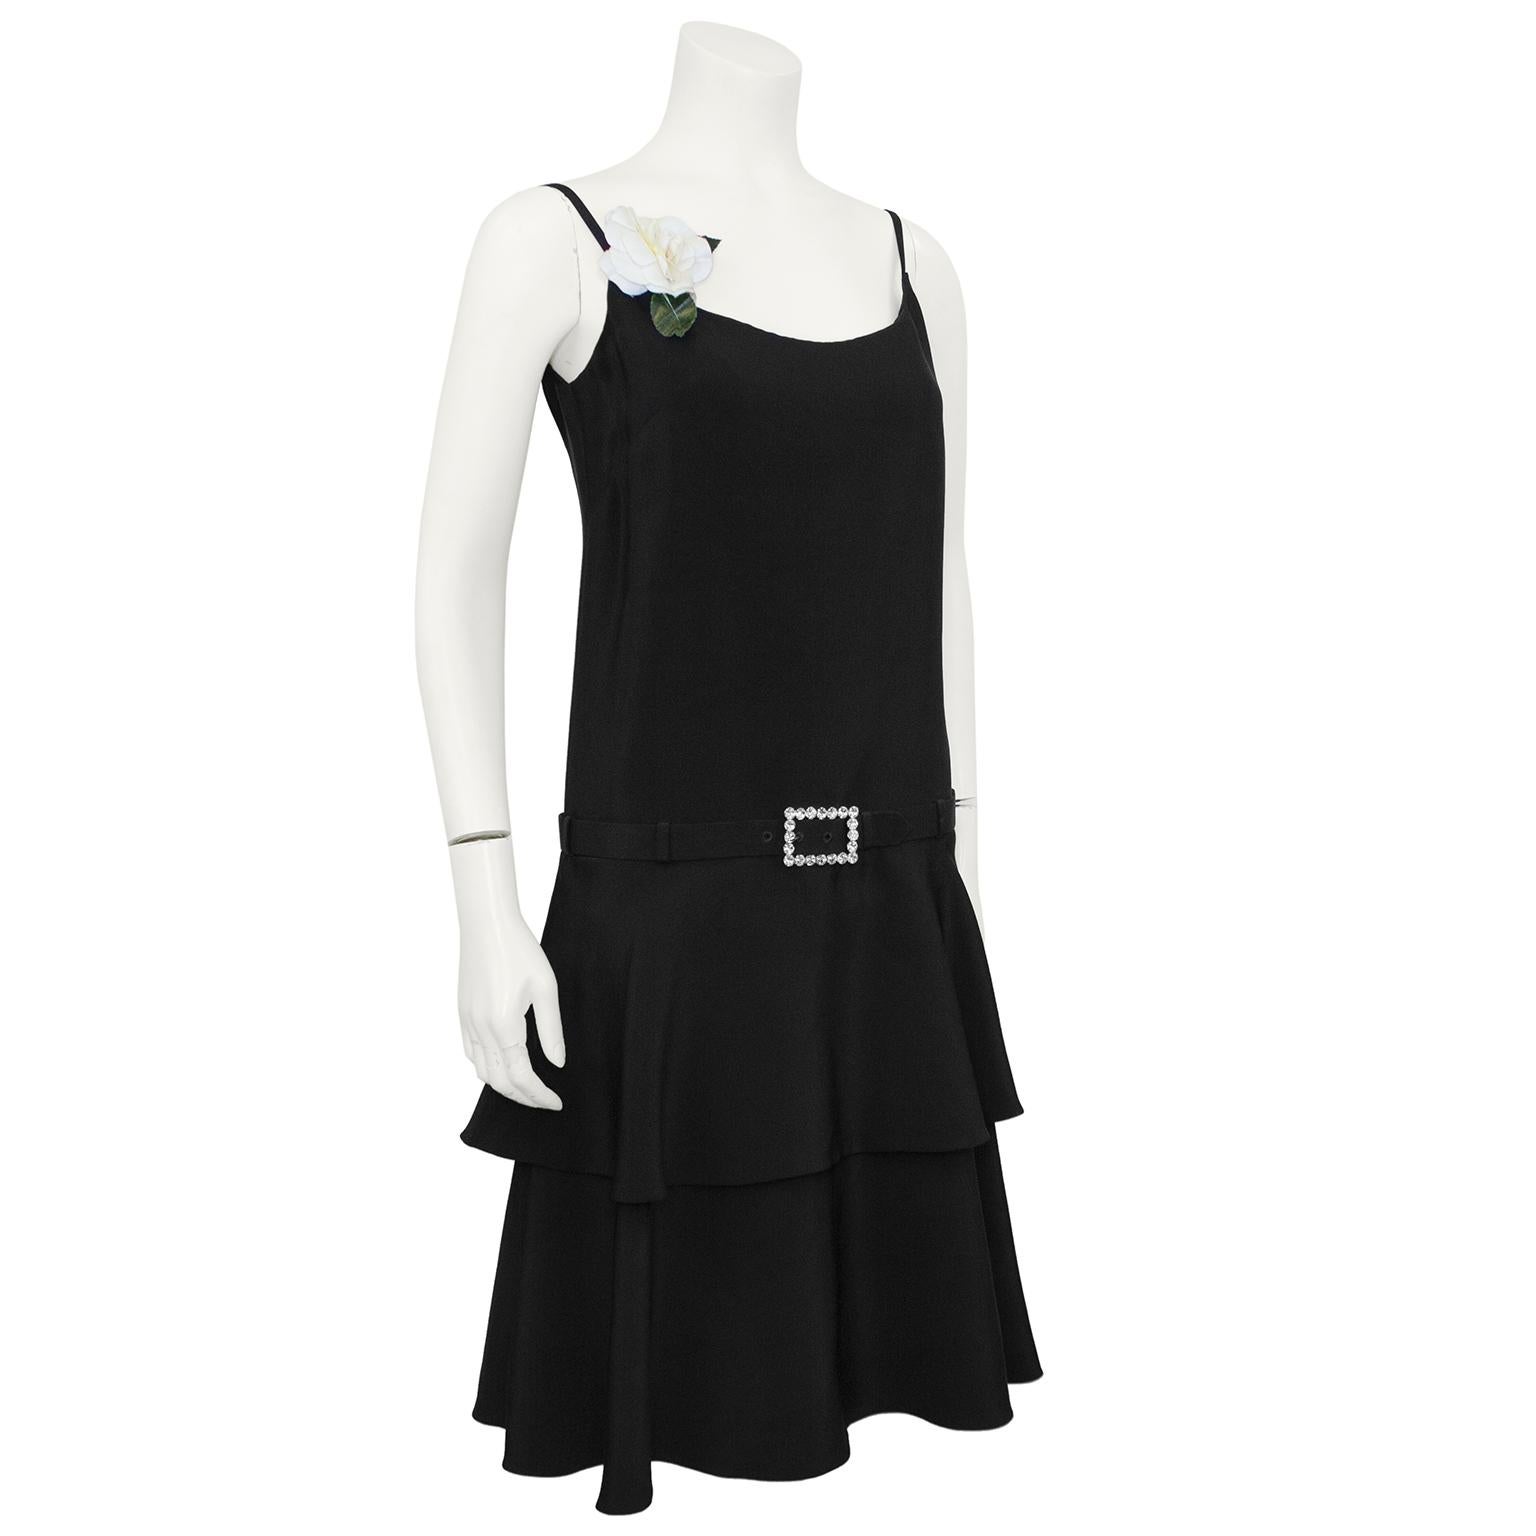 Norman Norell black silk drop waist dress with rhinestone buckle belt and tiered skirt from the 1960's. Attached gardenia accent on the strap may not be original, but so pretty. Pulls on over the head, the belt can be unfastened.  For a modern take